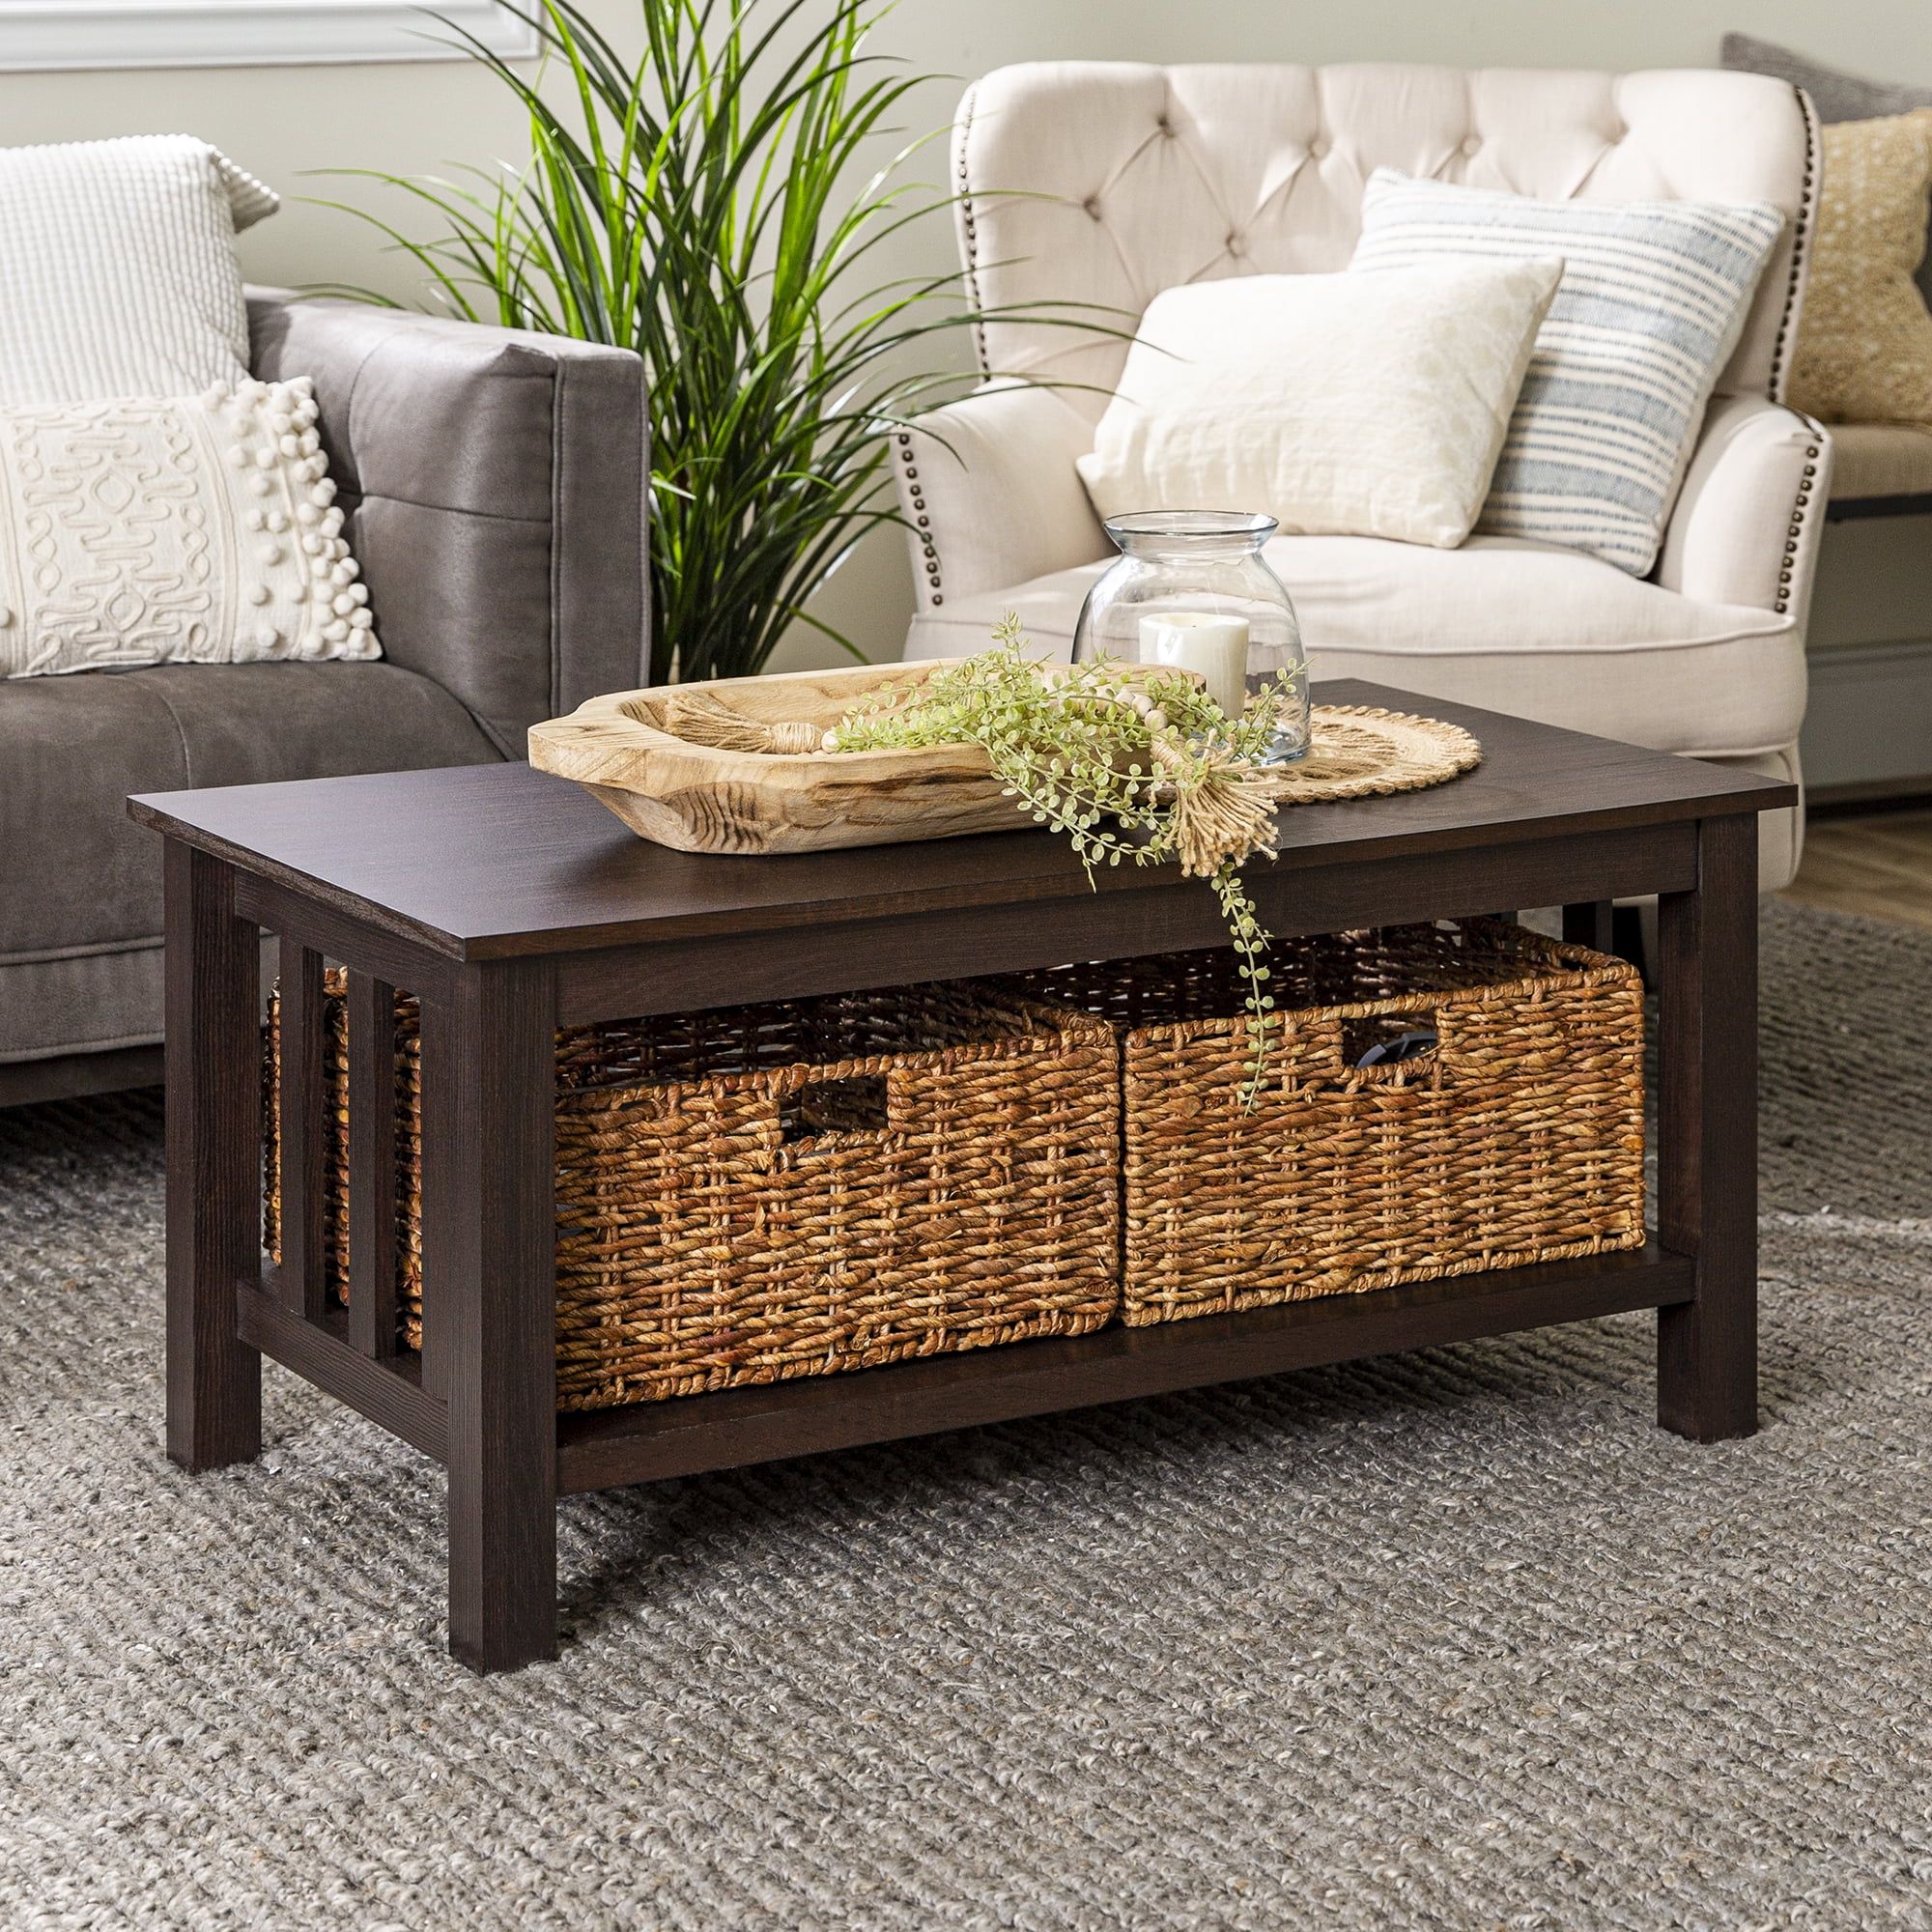 Woven Paths Traditional Storage Coffee Table With Bins, Espresso Throughout Woven Paths Coffee Tables (Gallery 5 of 20)